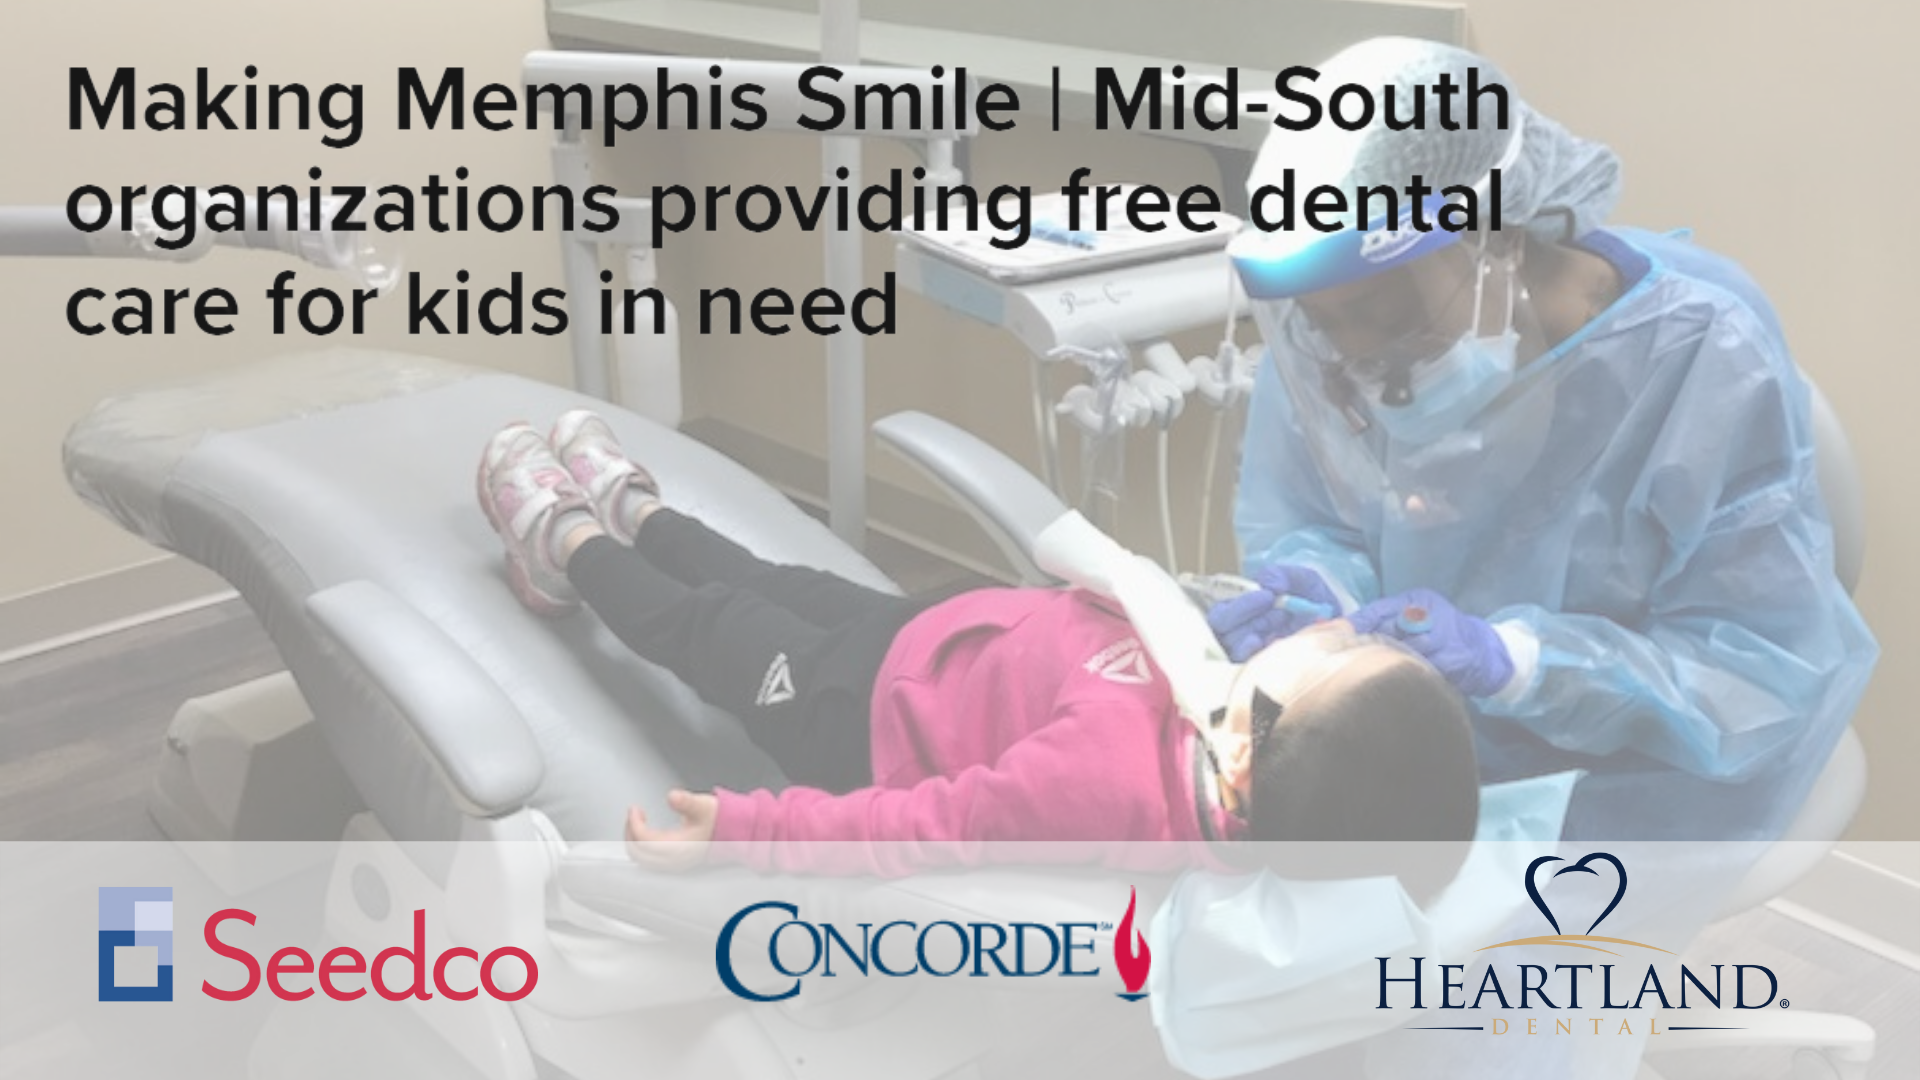 Making Memphis Smile | Mid-South organizations providing free dental care for kids in need